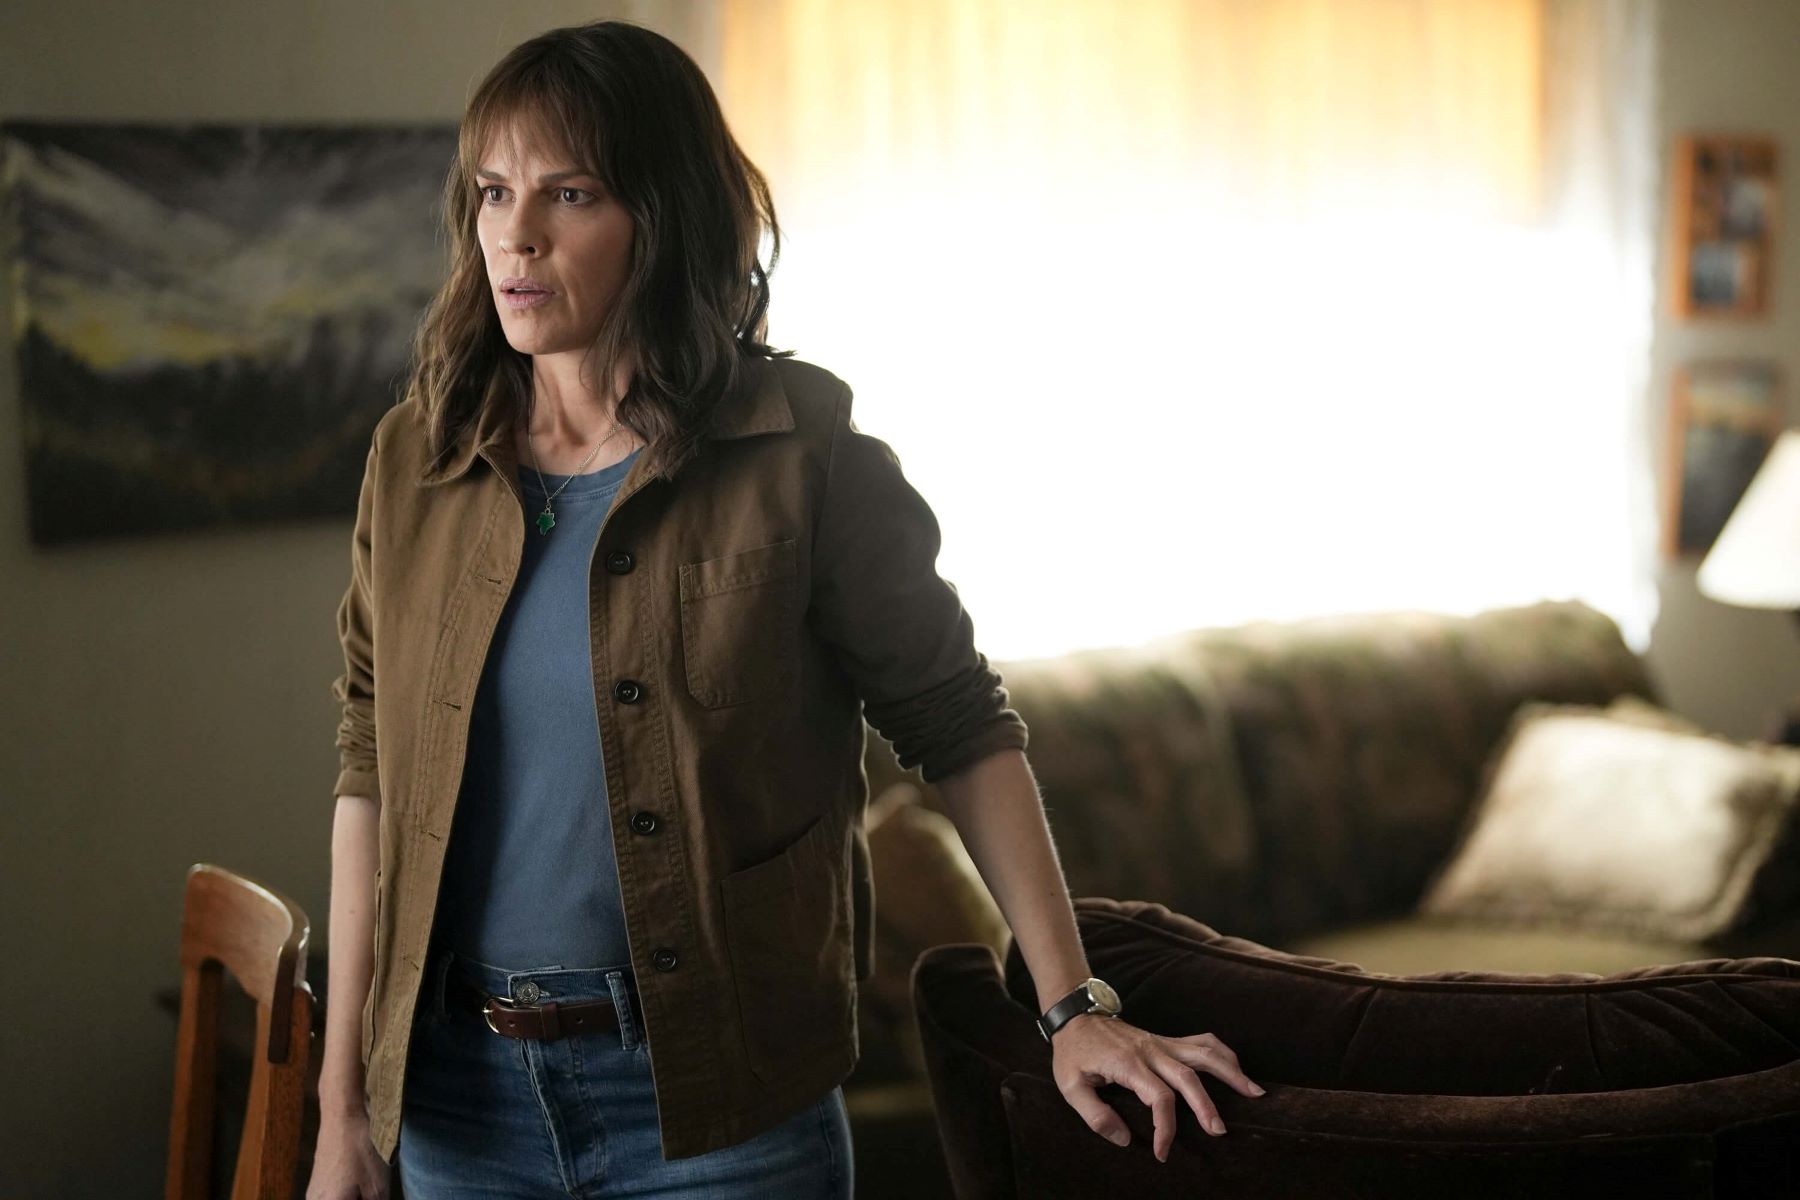 Hilary Swank, in character as Eileen Fitzgerald in 'Alaska Daily,' which has yet to be renewed for season 2, wears a brown jacket over a blue shirt and jeans.